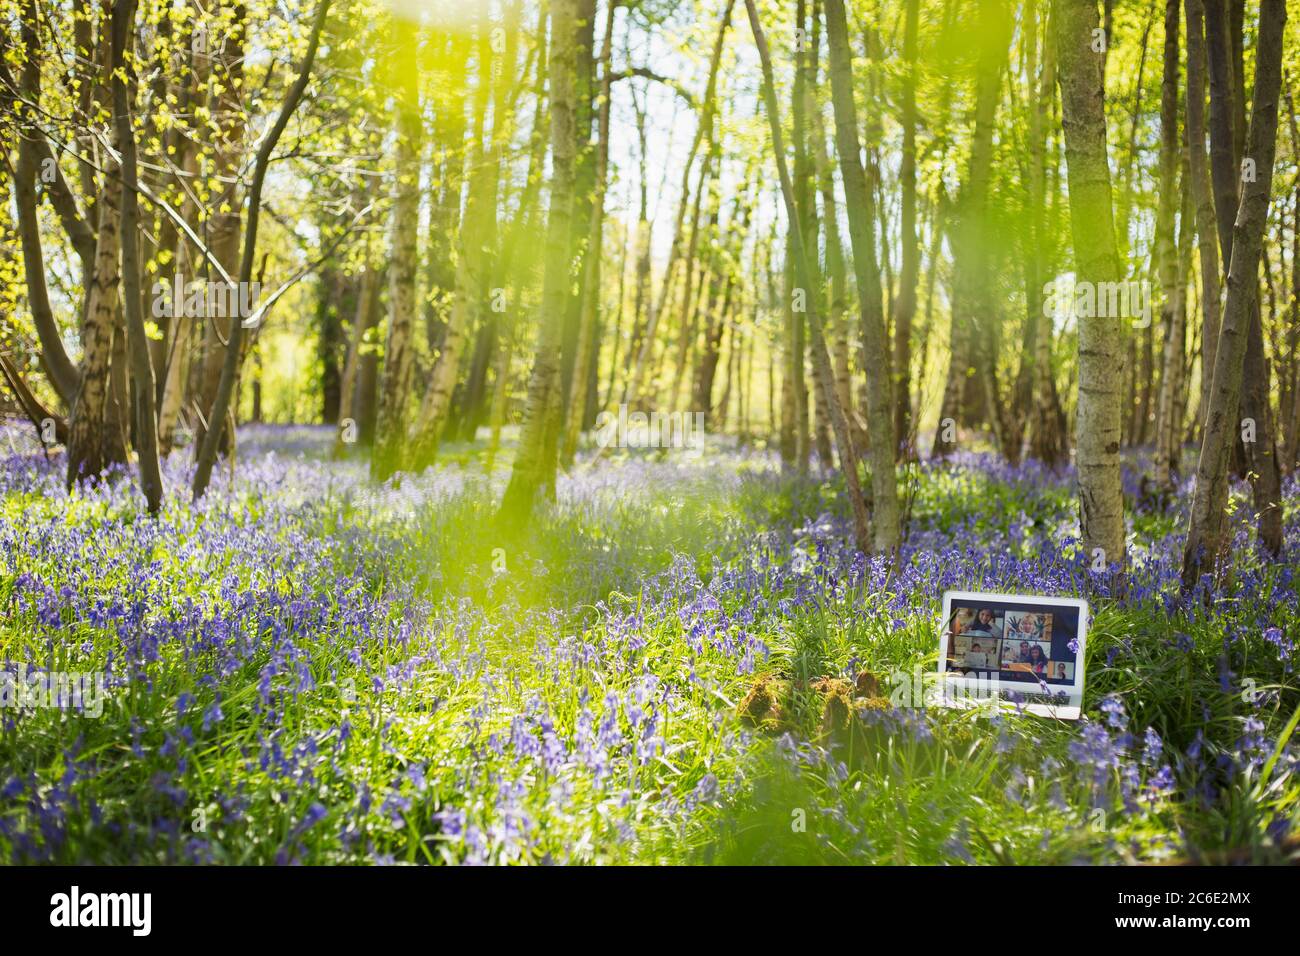 Video chat on laptop screen in sunny idyllic bluebell woods Stock Photo